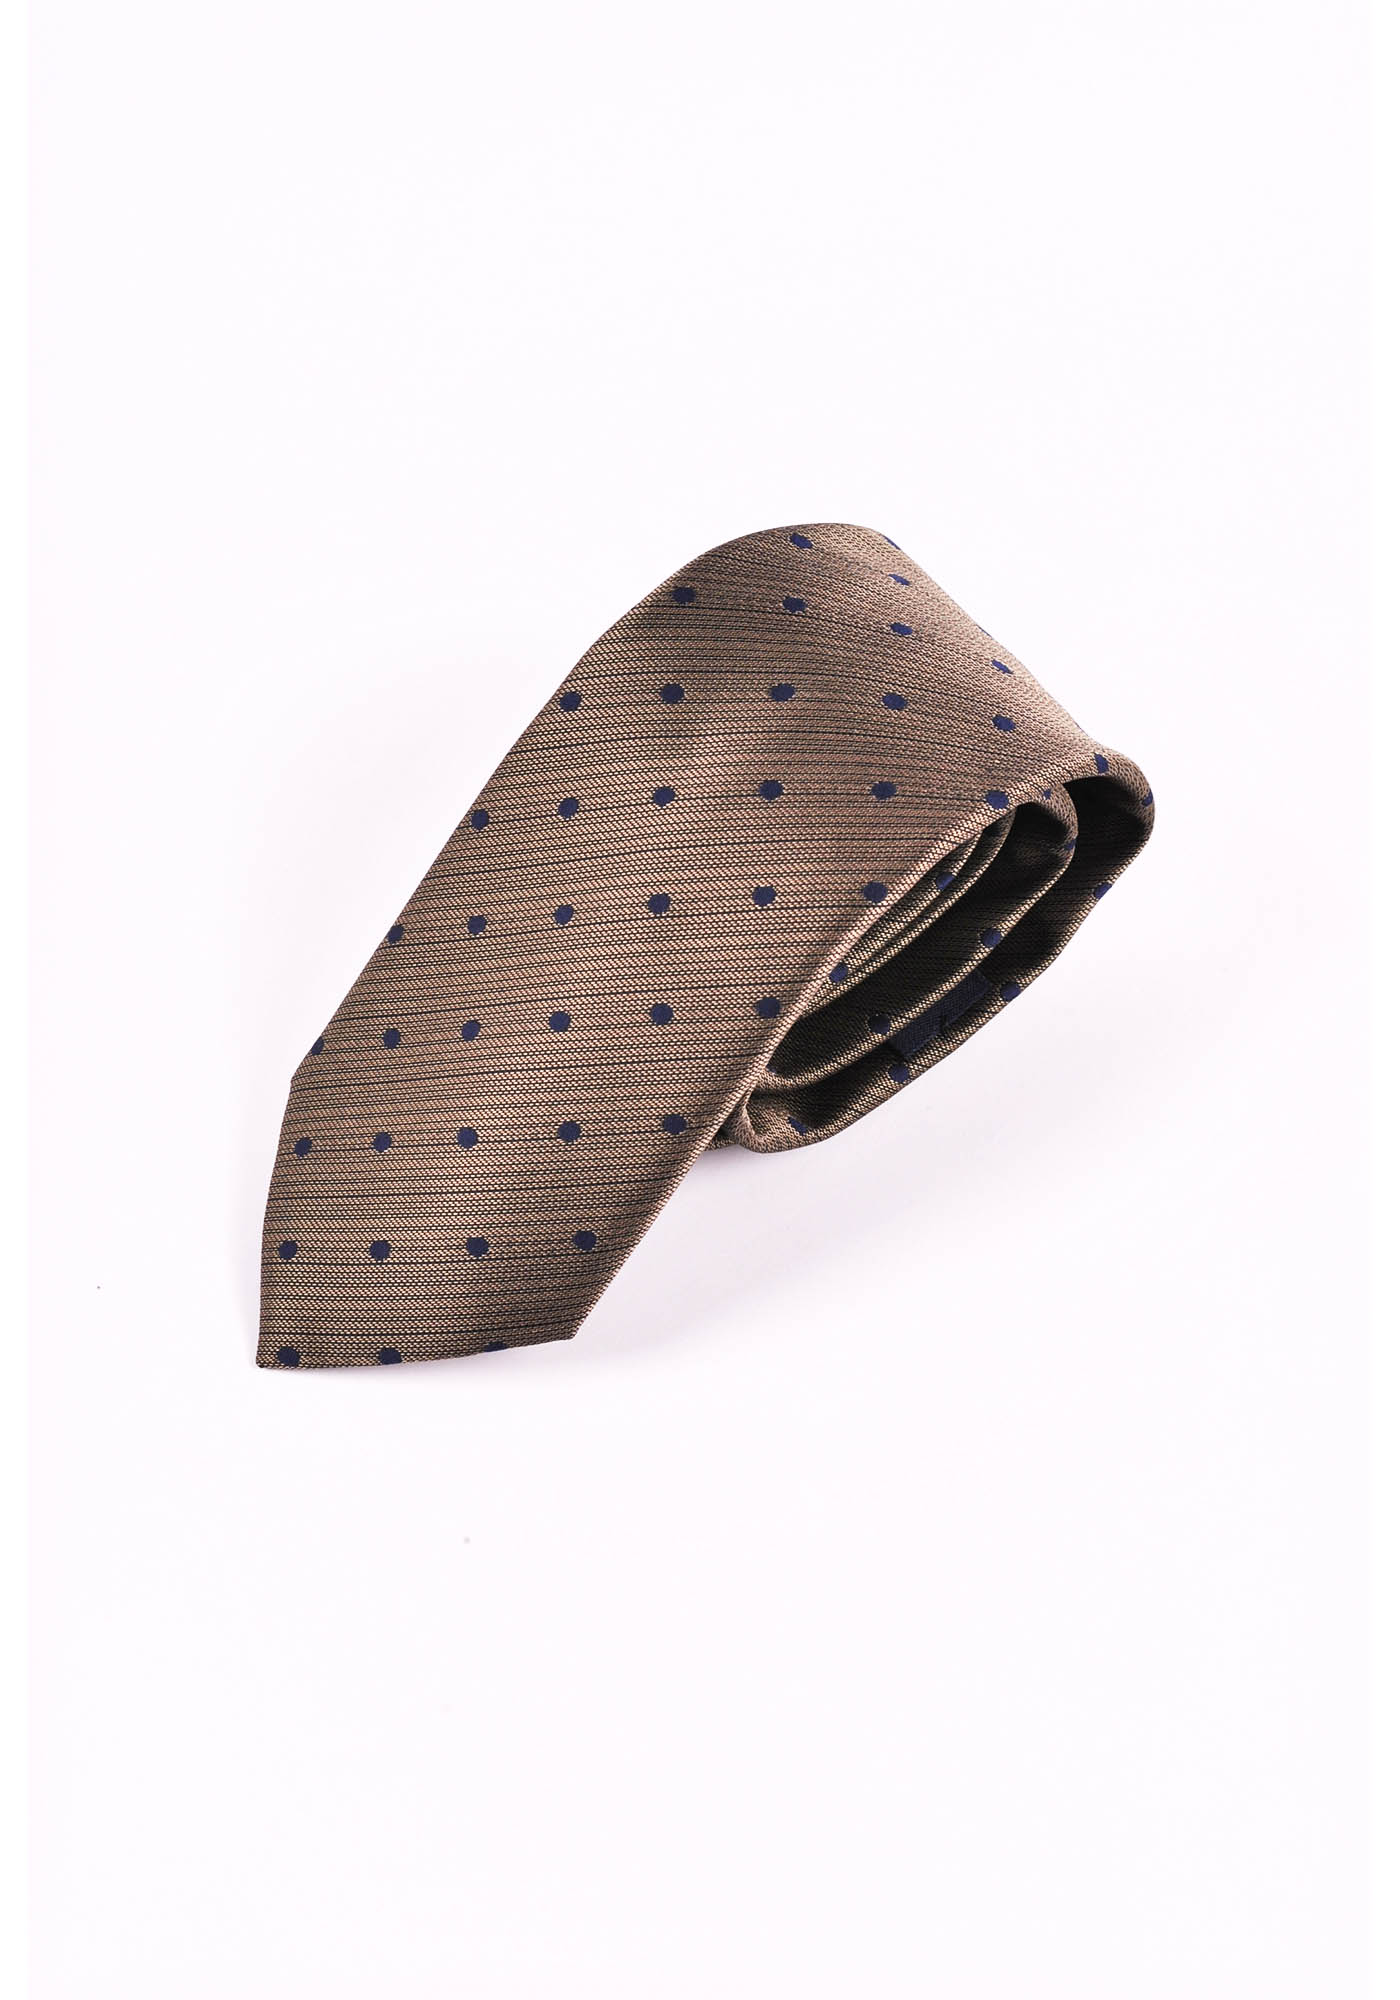 All-over patterned tie in silk jacquard